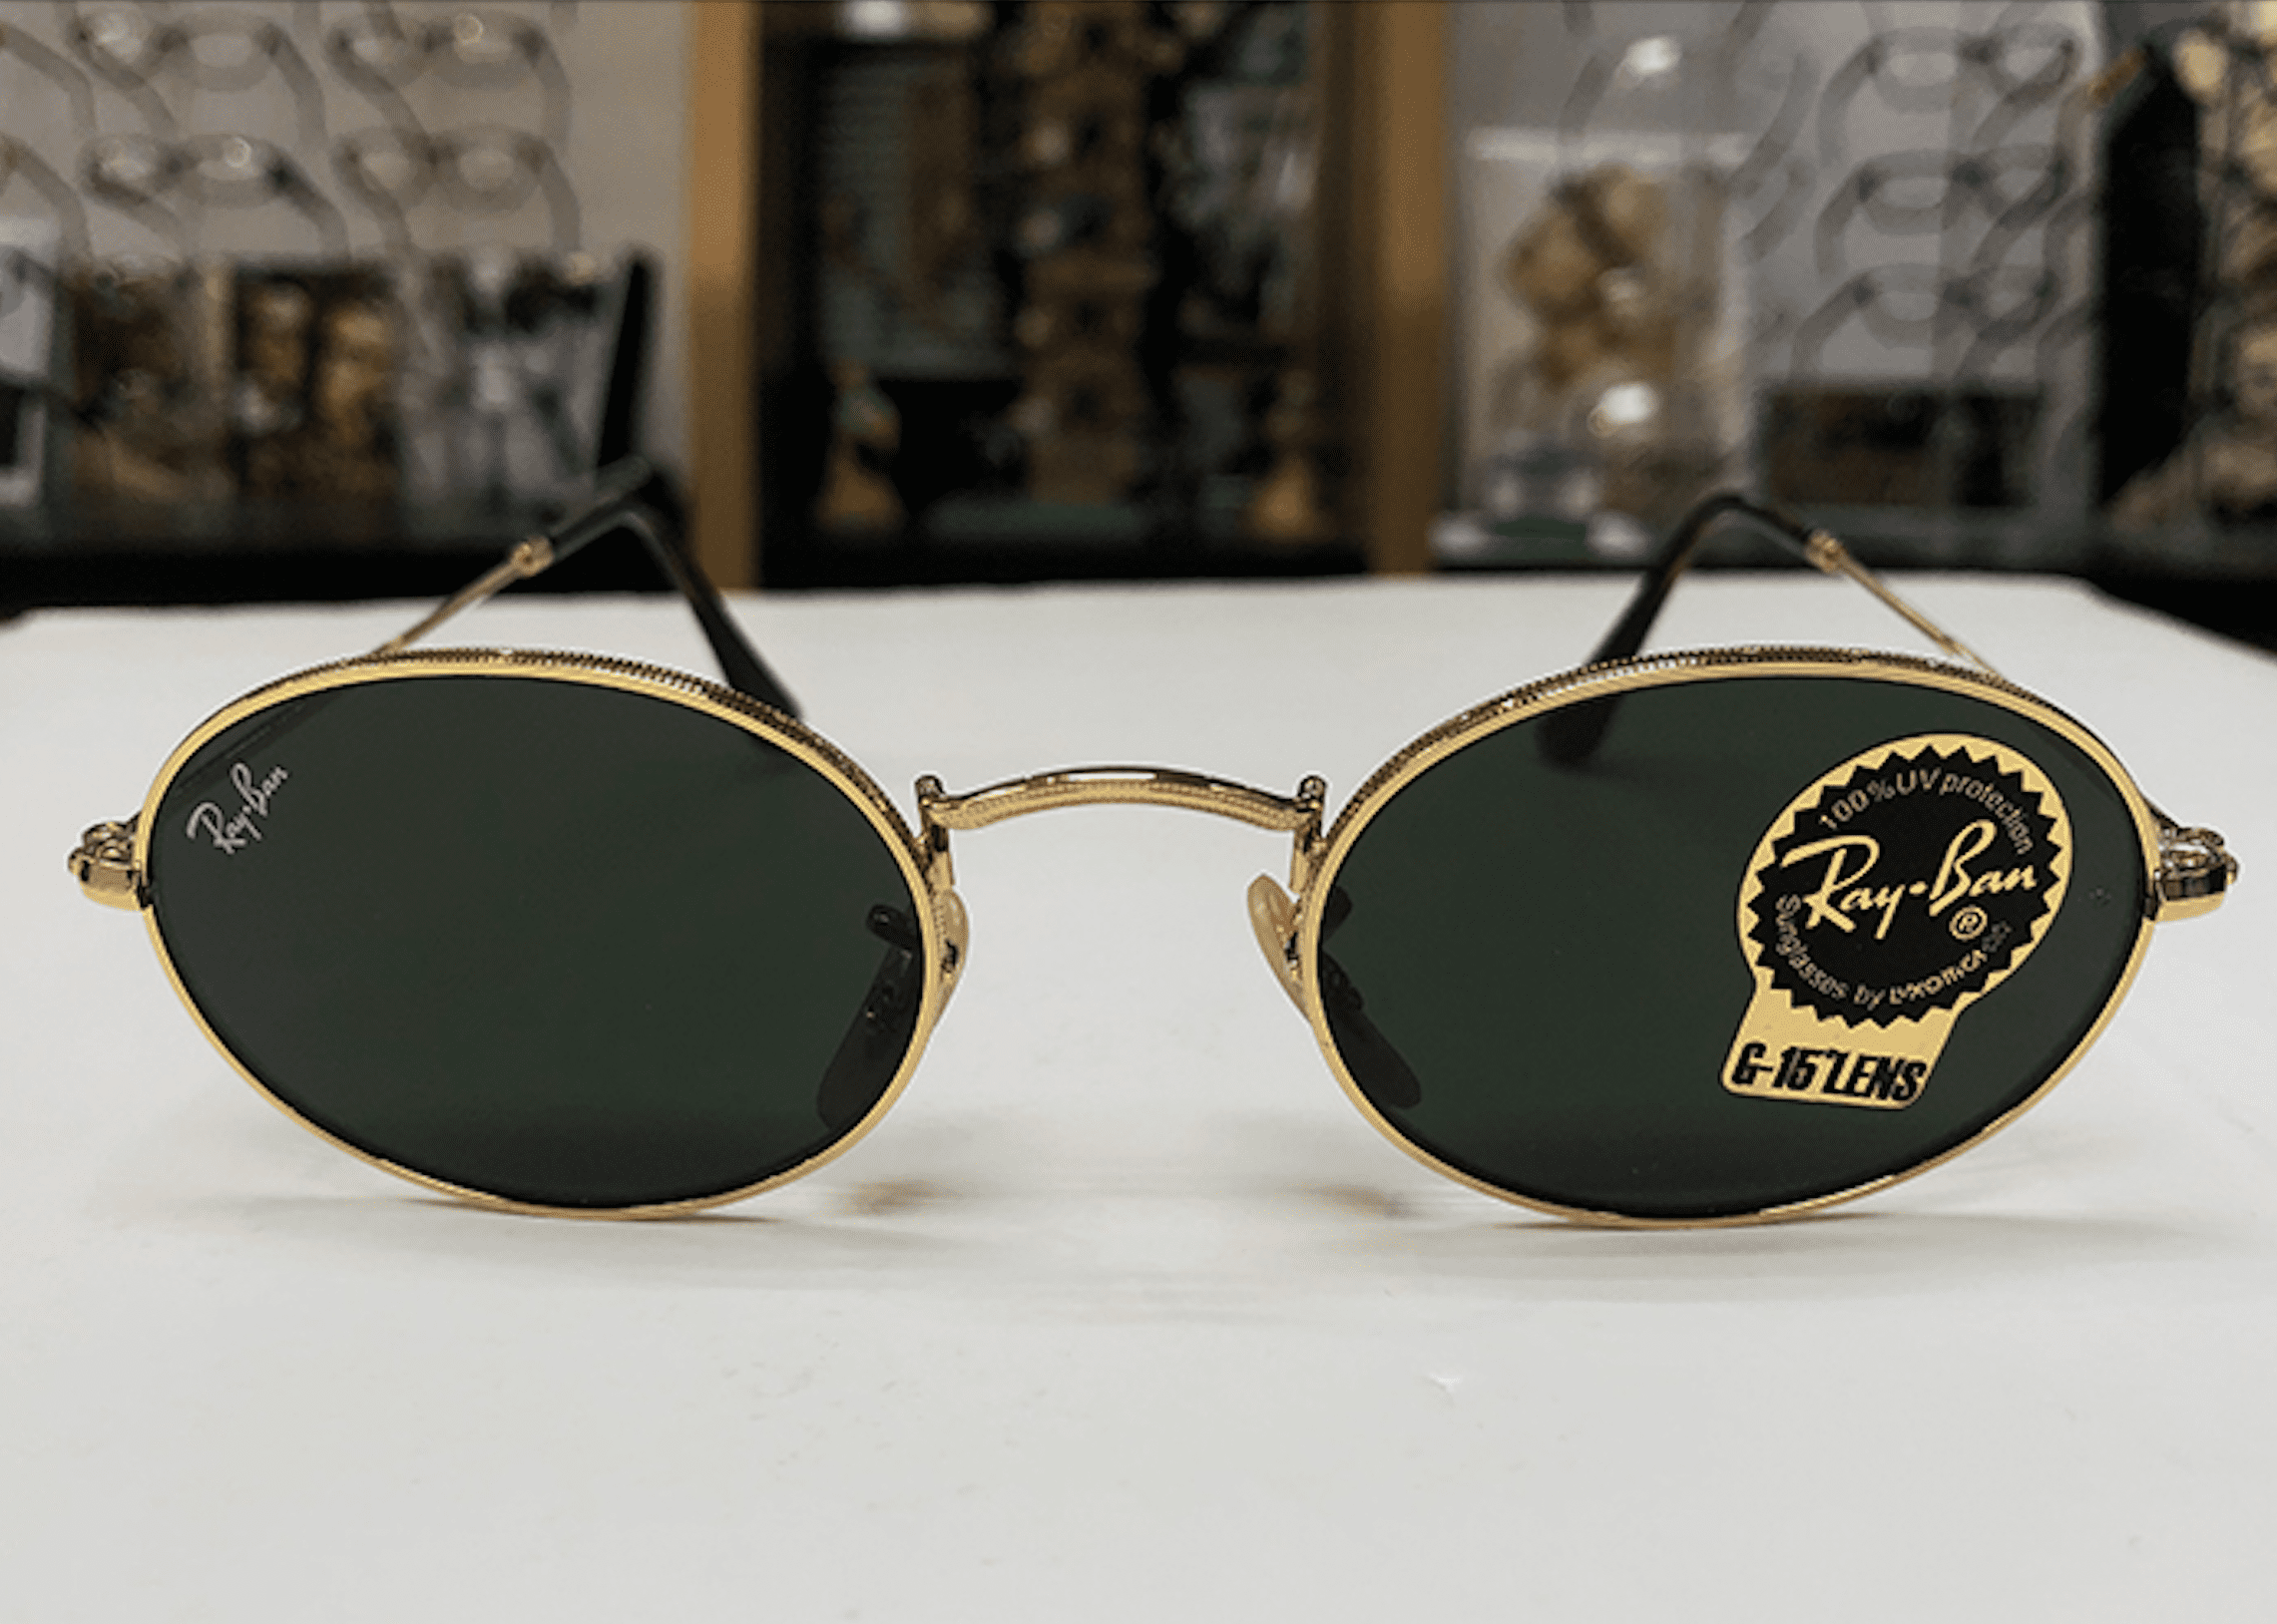 raybans-front